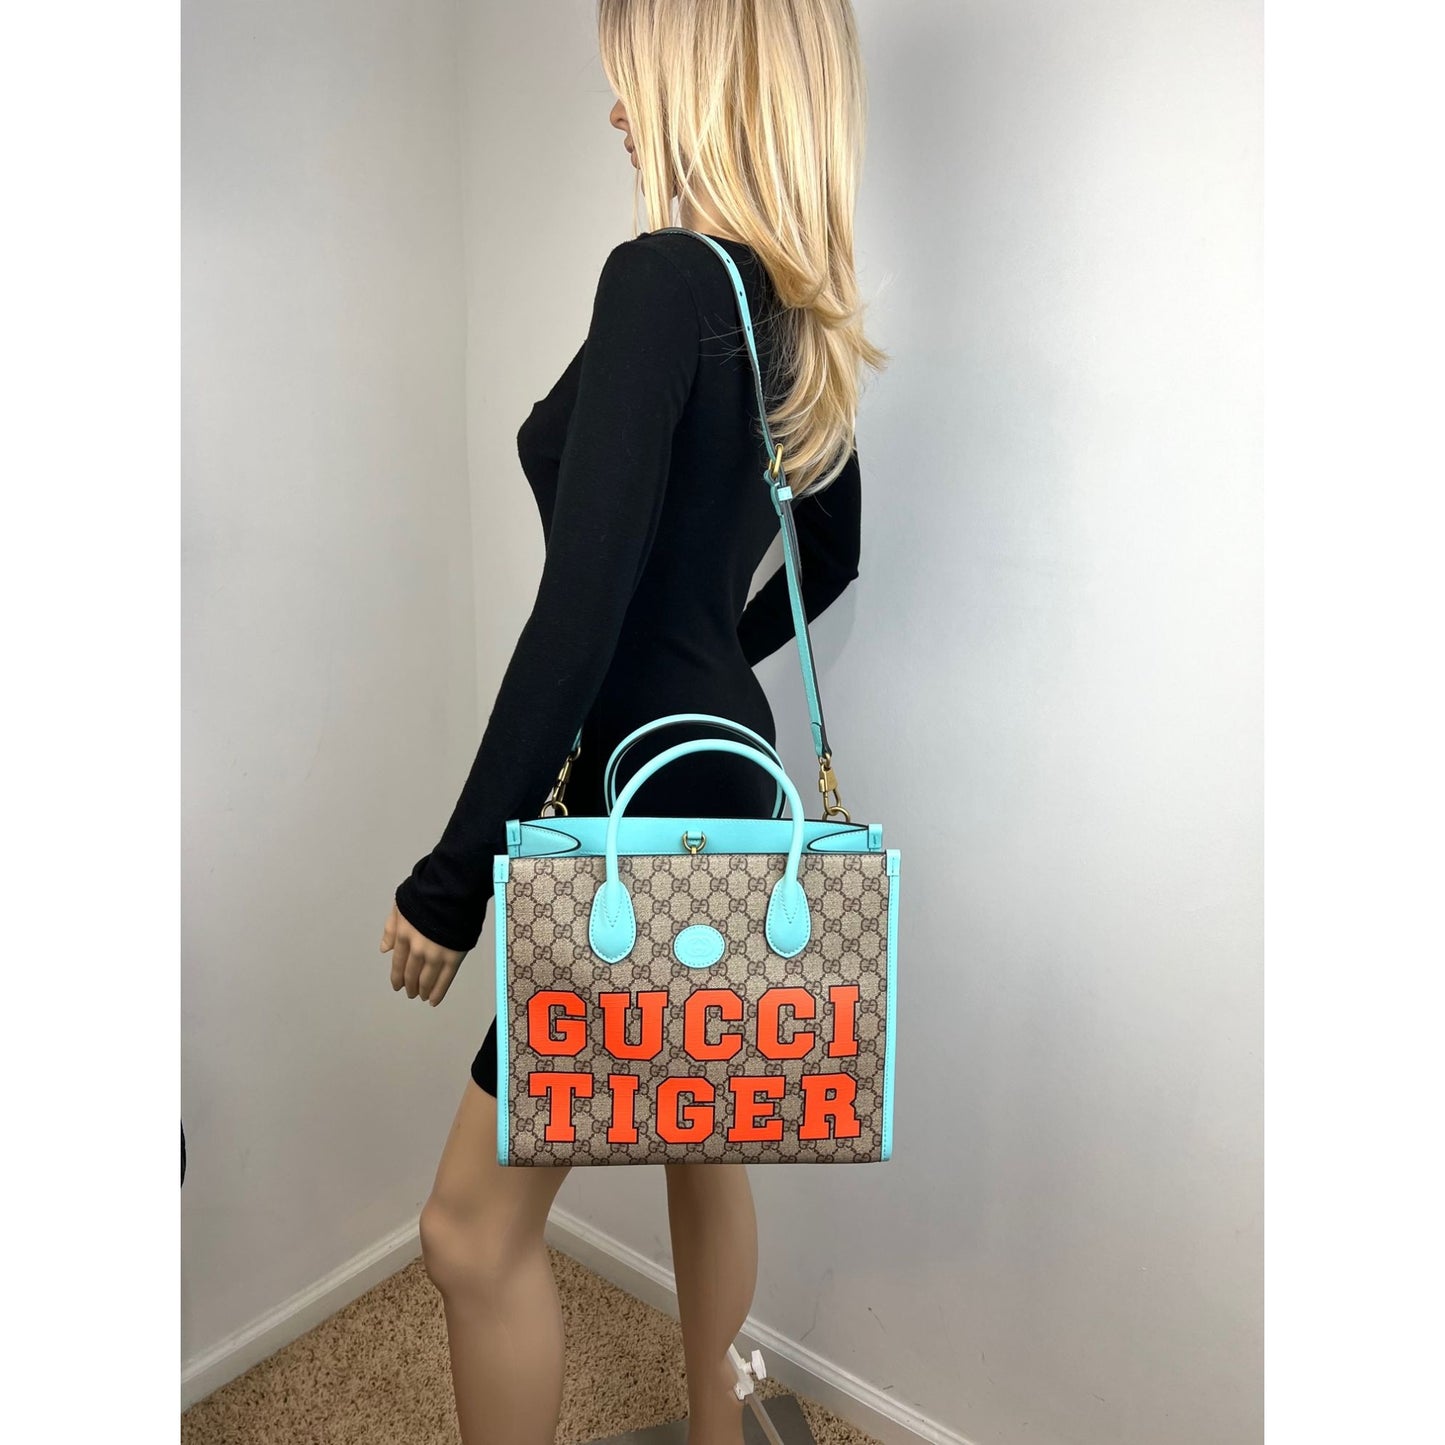 Gucci Tiger Medium Tote Bag Light Blue in Canvas/Leather with Gold